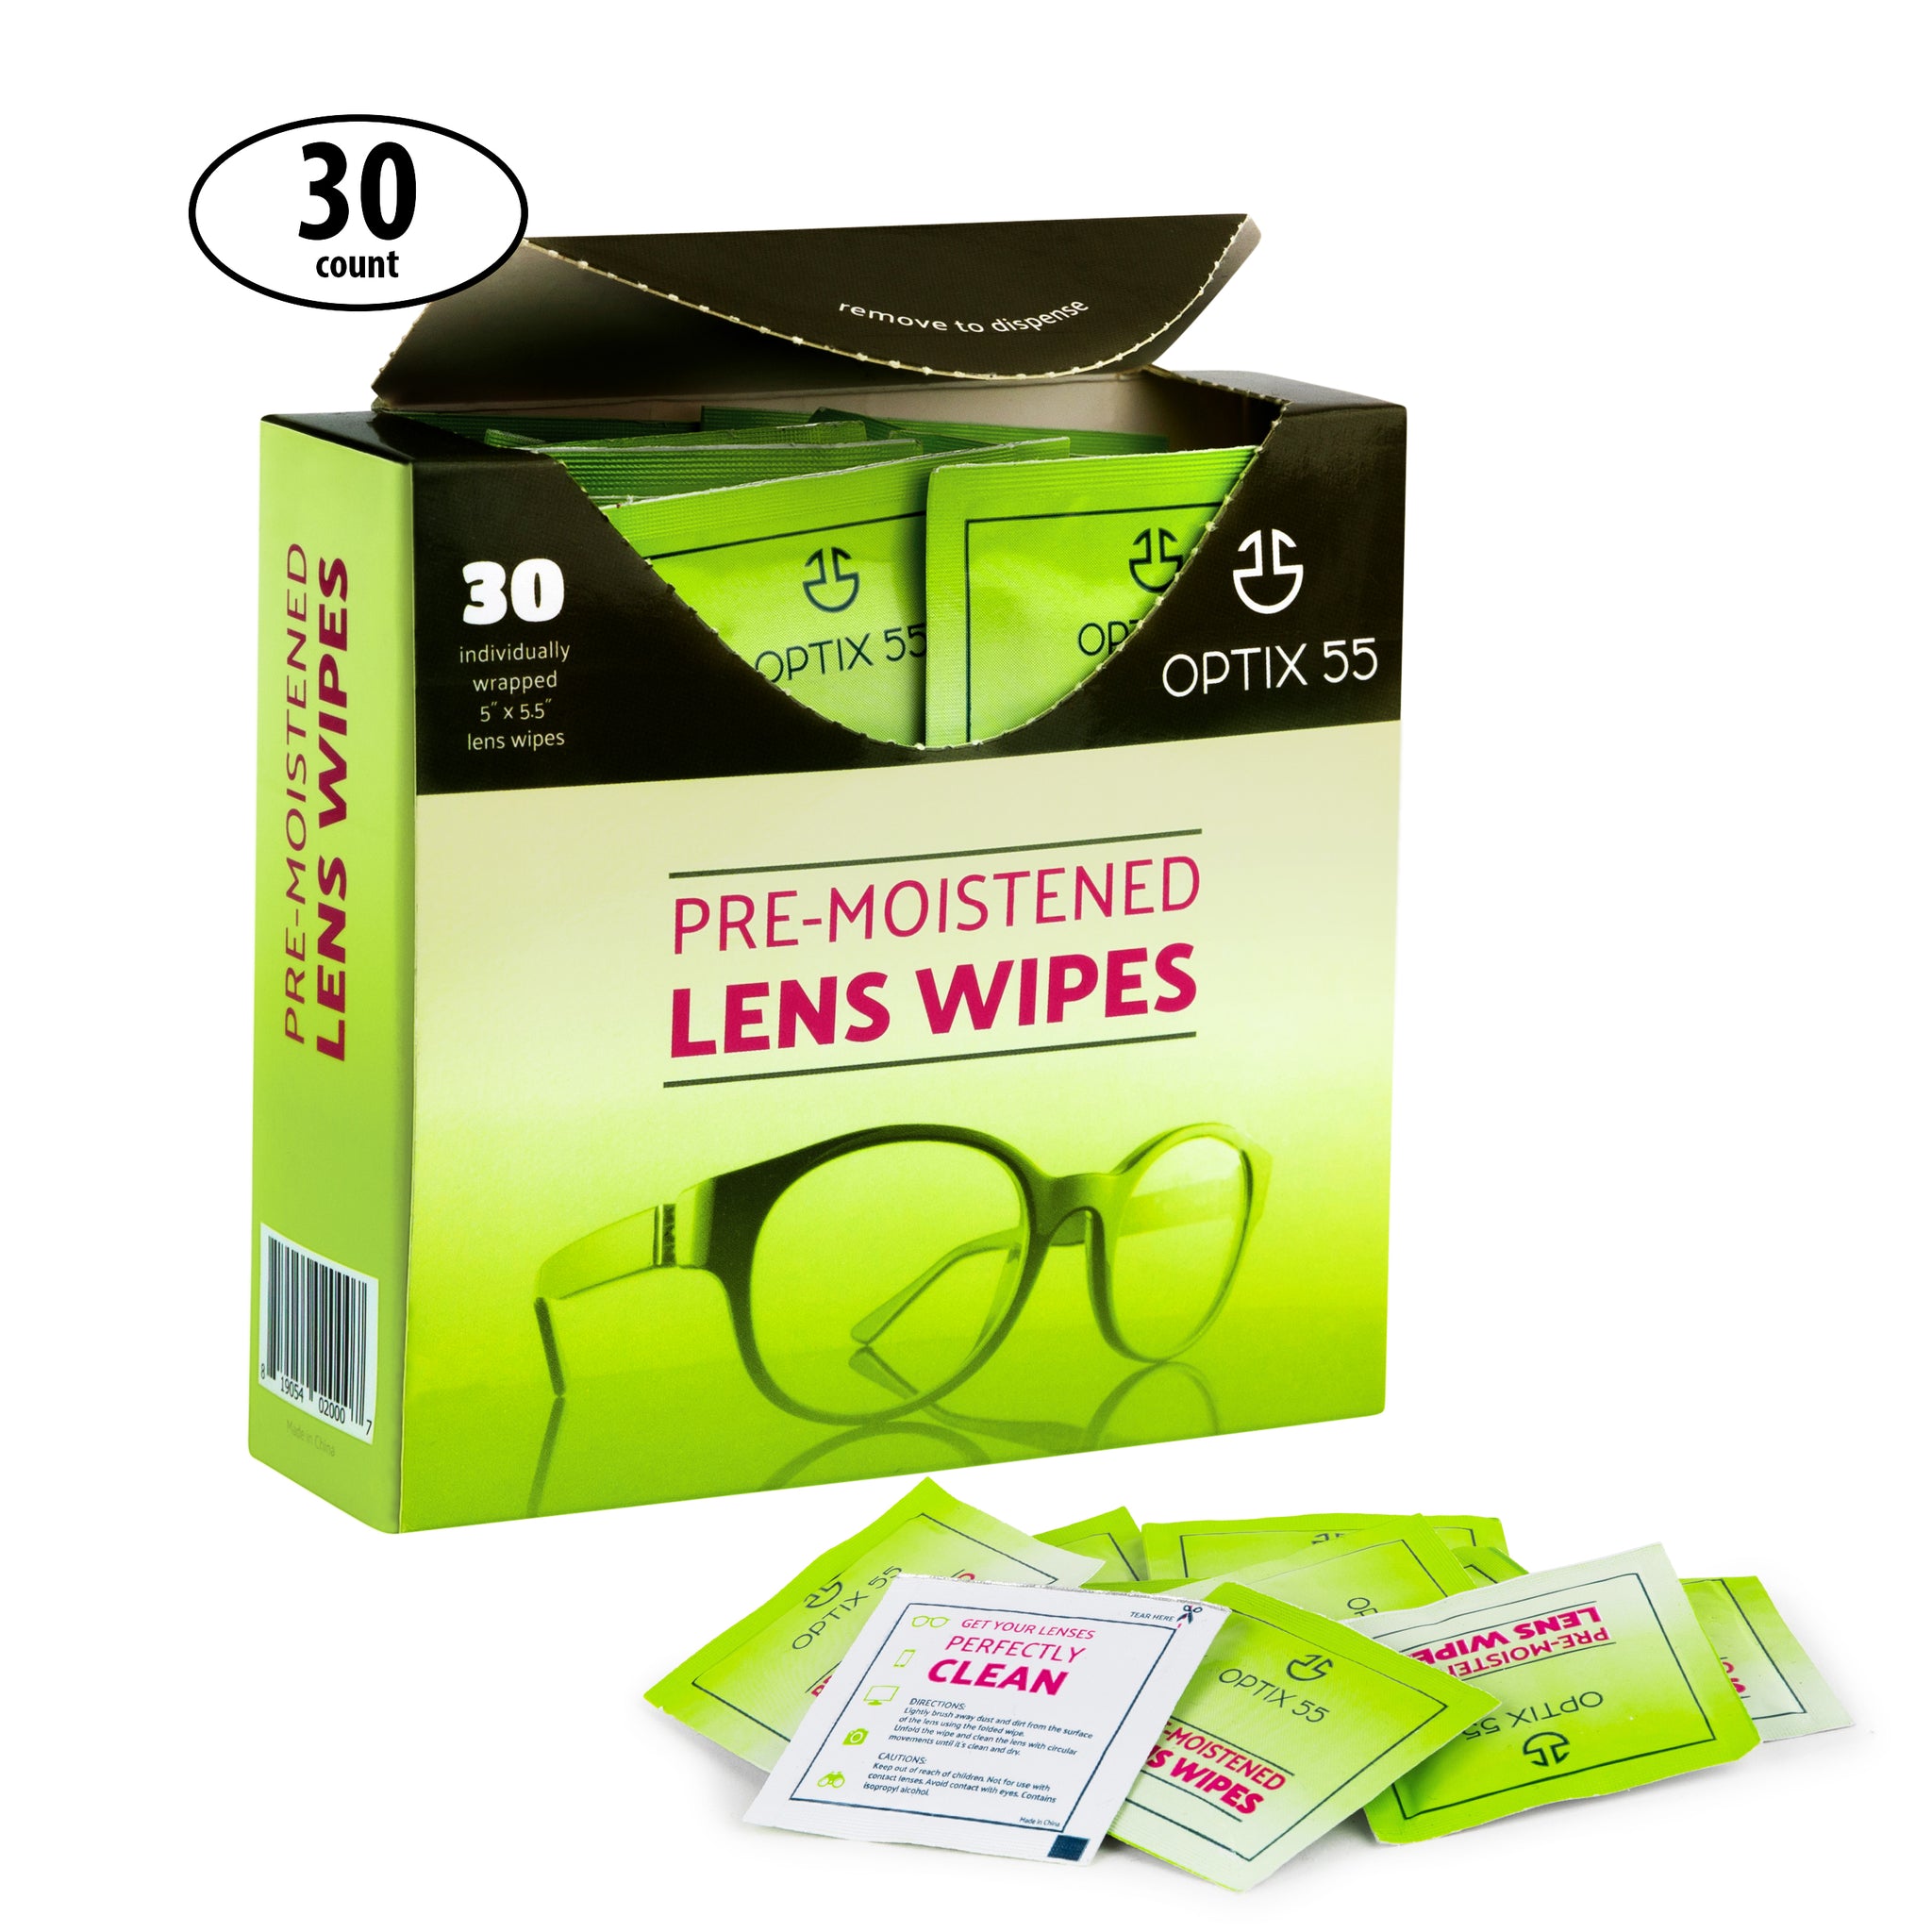 Invisible Glass Lens Wipes